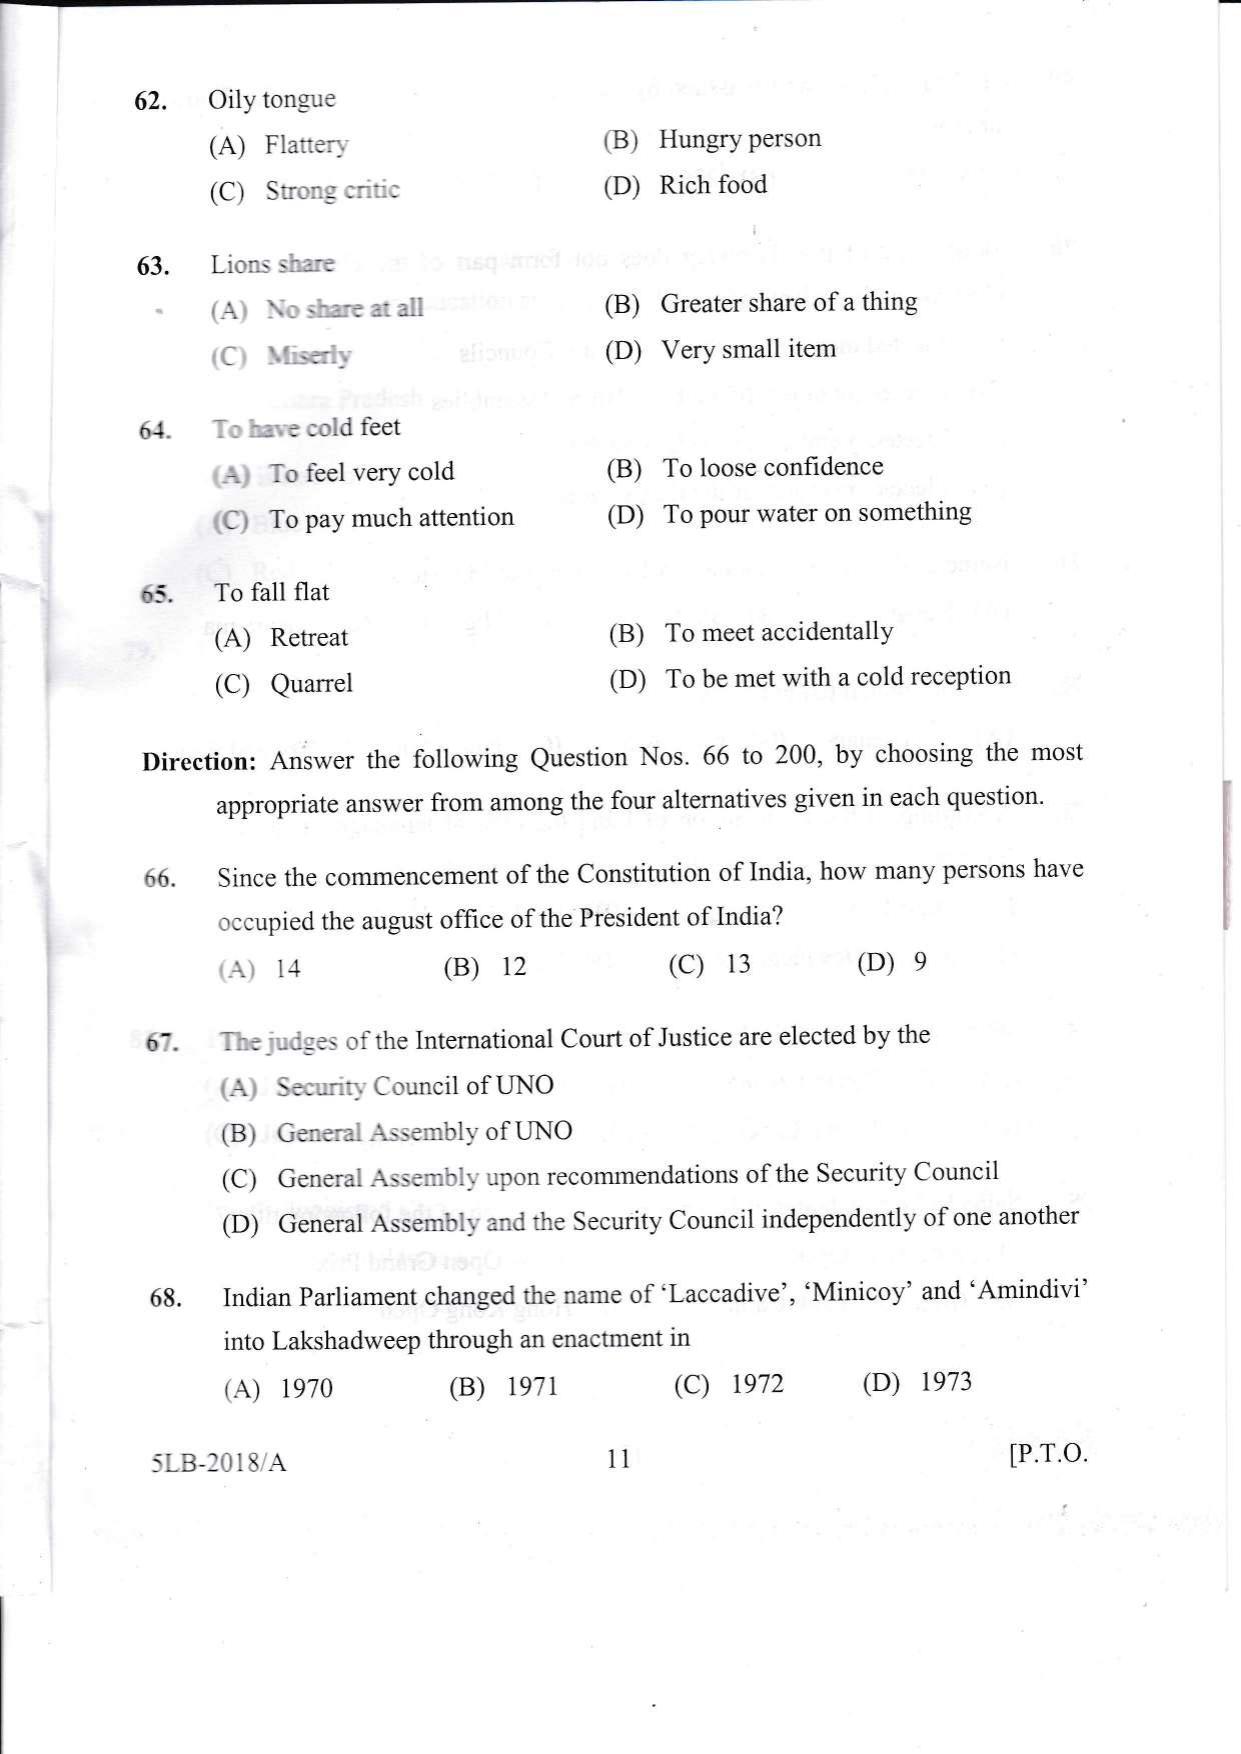 KLEE 5 Year LLB Exam 2018 Question Paper - Page 11